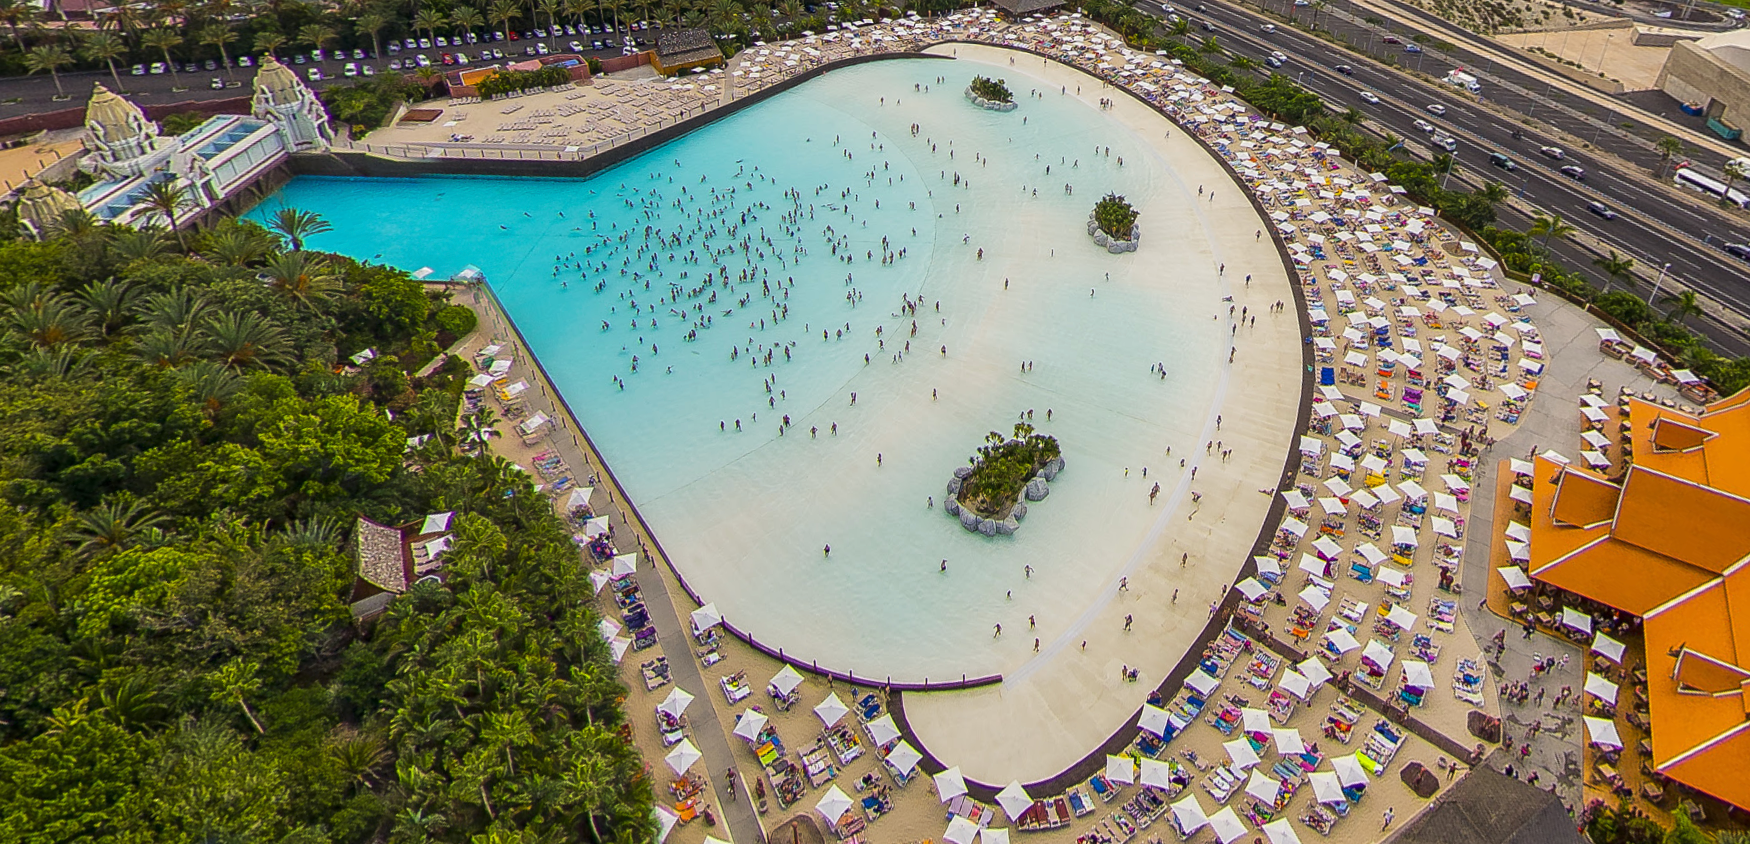 Siam Park by Google Earth;